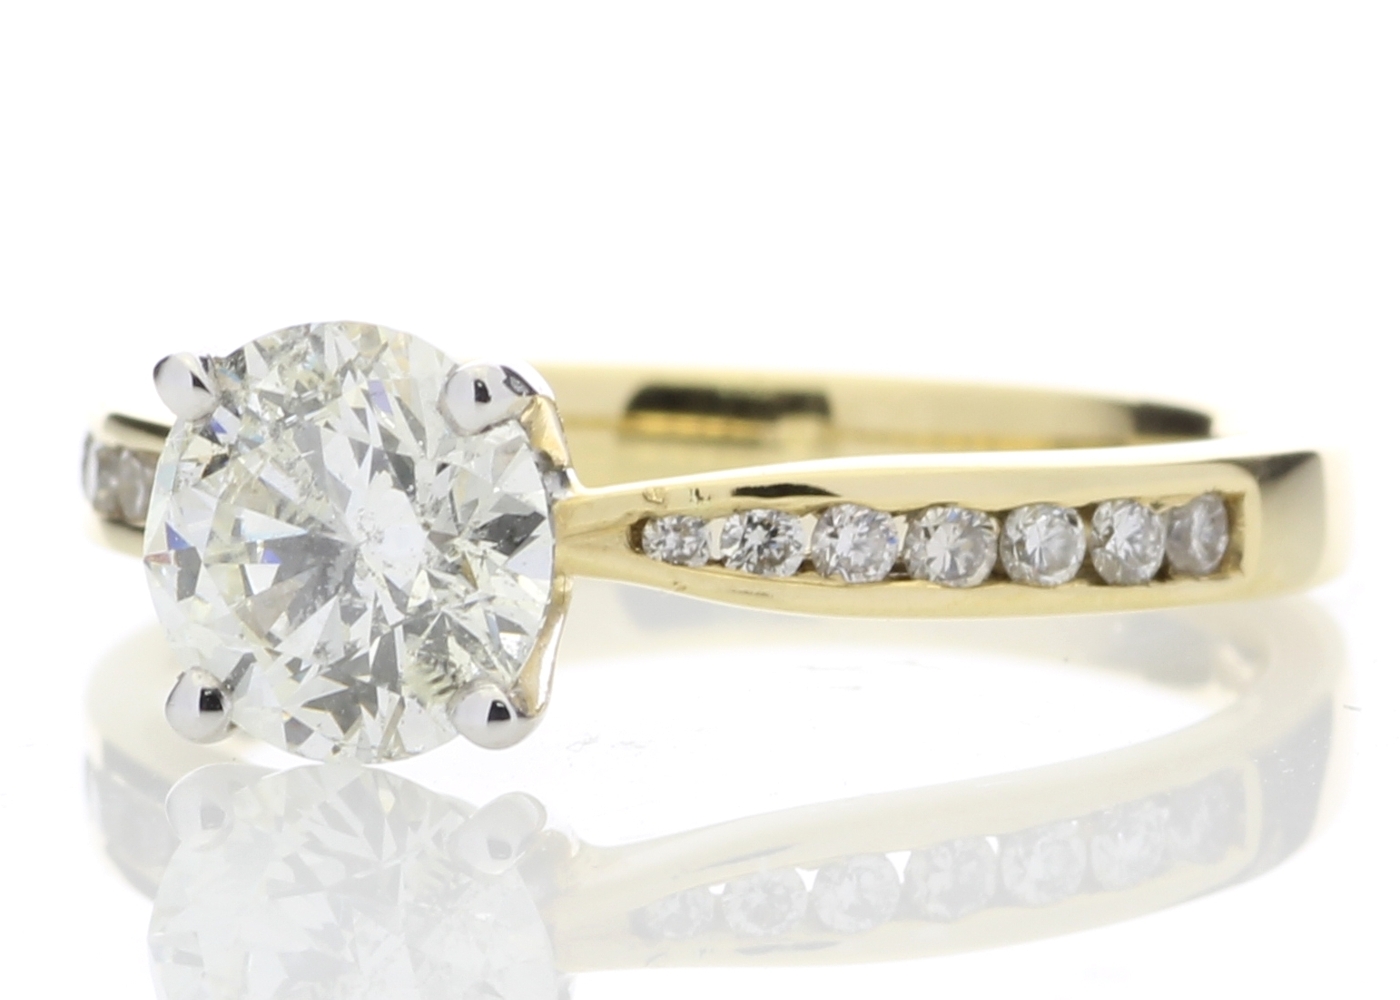 18ct Yellow Gold Single Stone Diamond Ring With Stone Set Shoulders (1.11) 1.28 Carats - Image 2 of 5